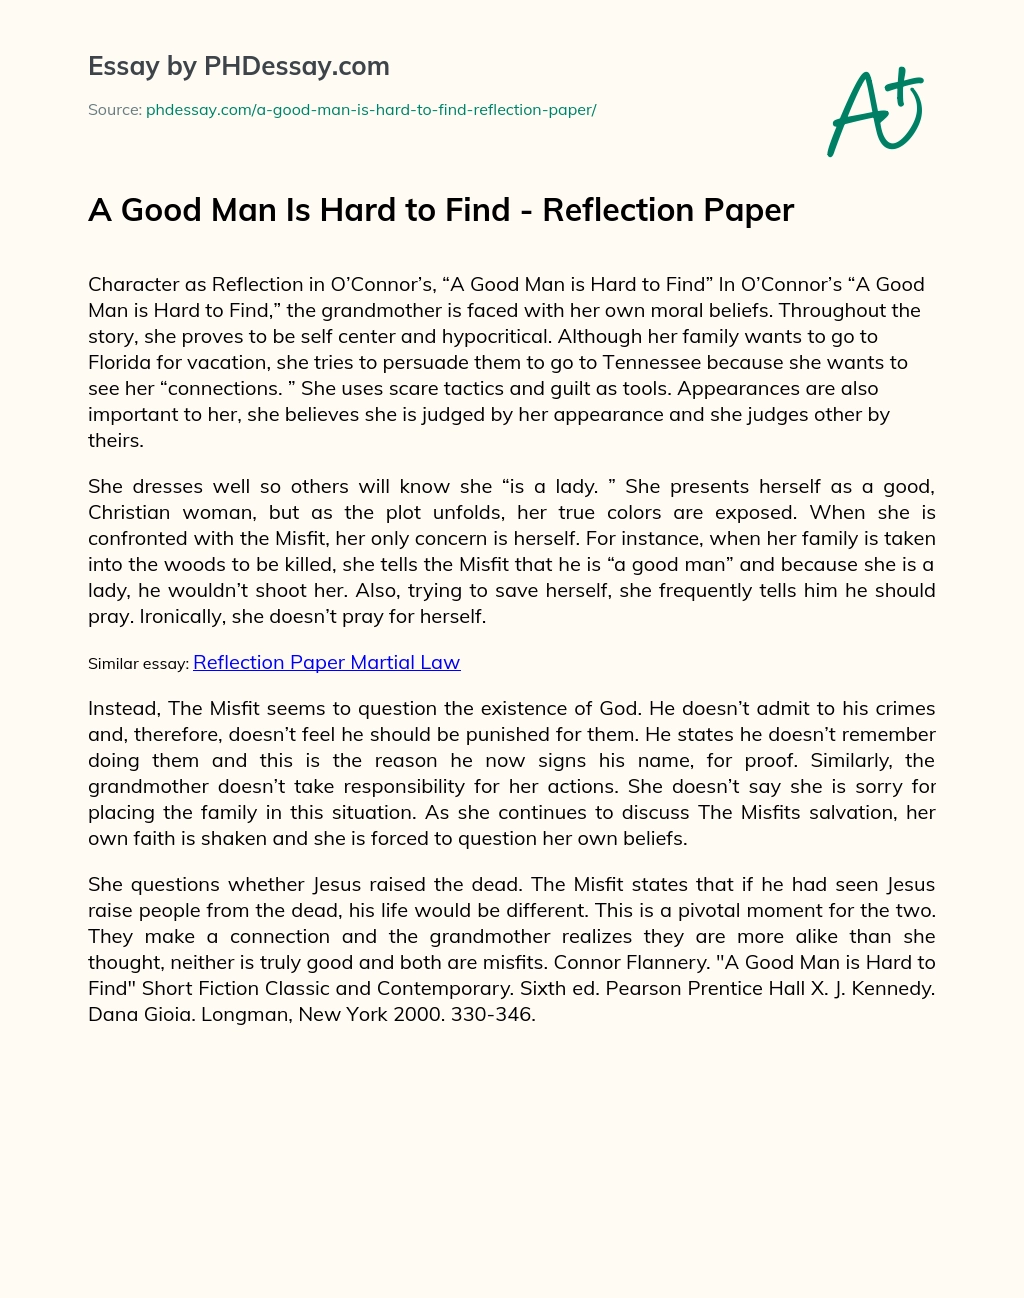 A Good Man Is Hard to Find – Reflection Paper essay